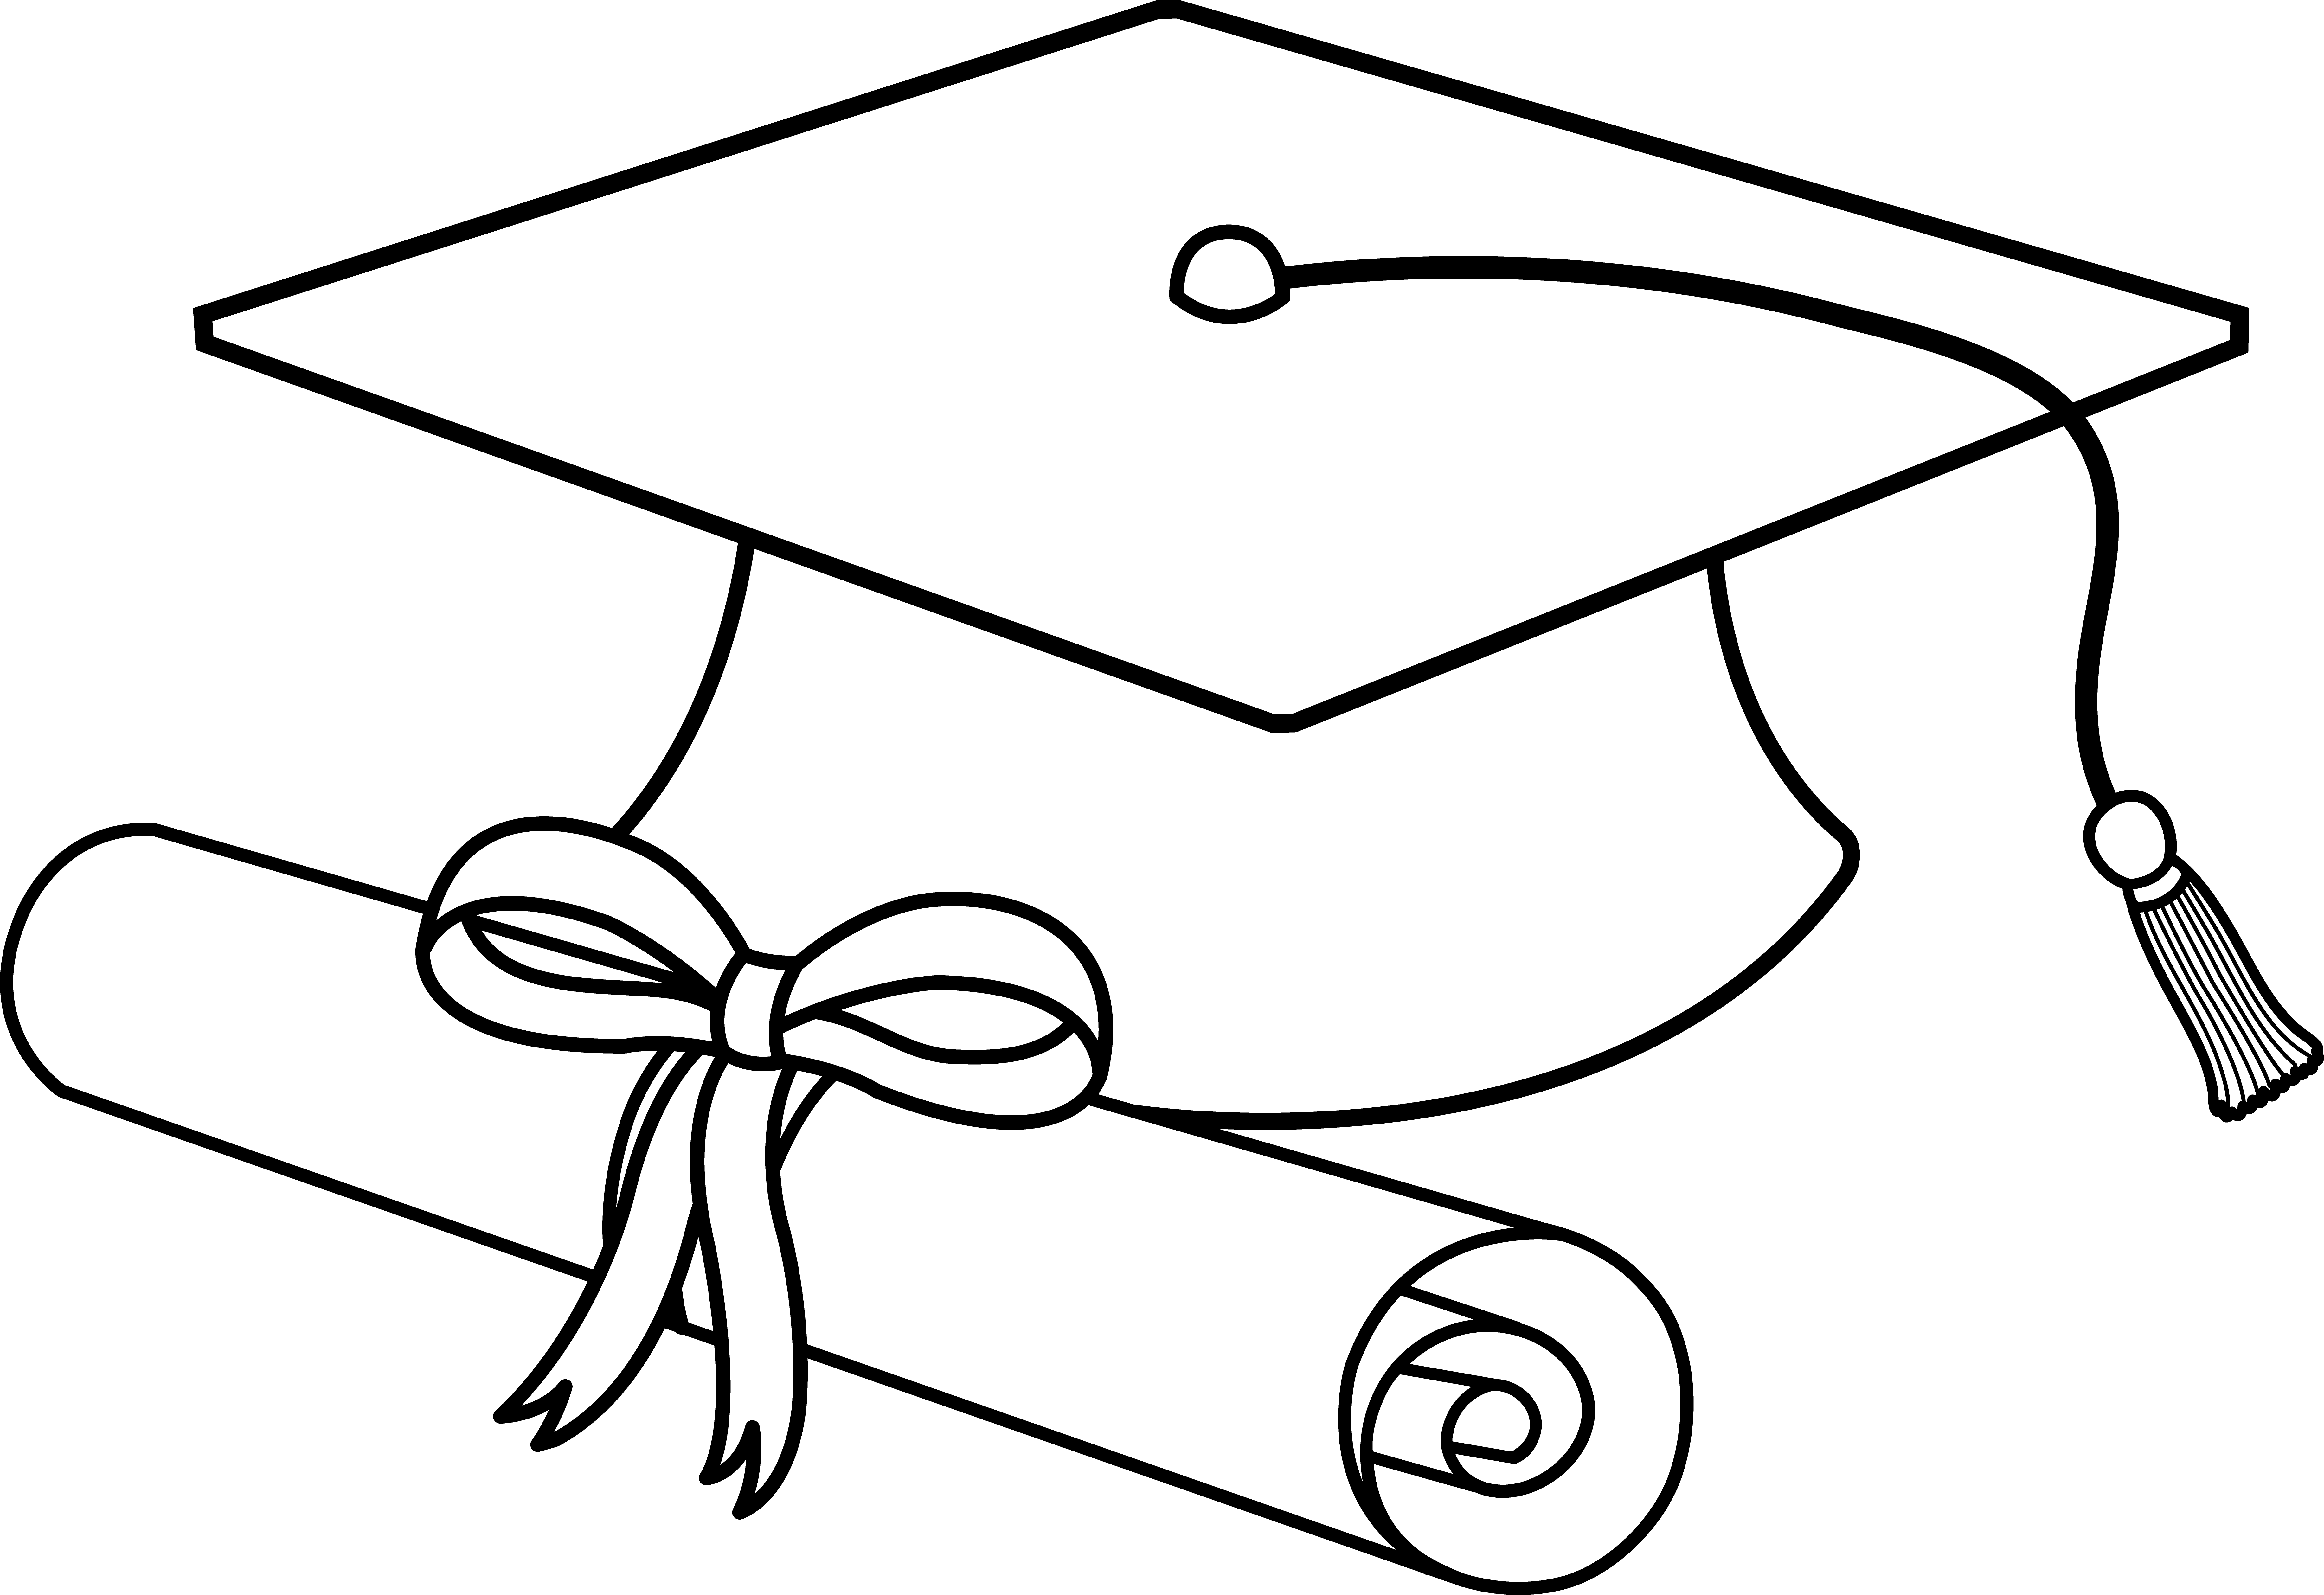 graduation cap and gown coloring pages